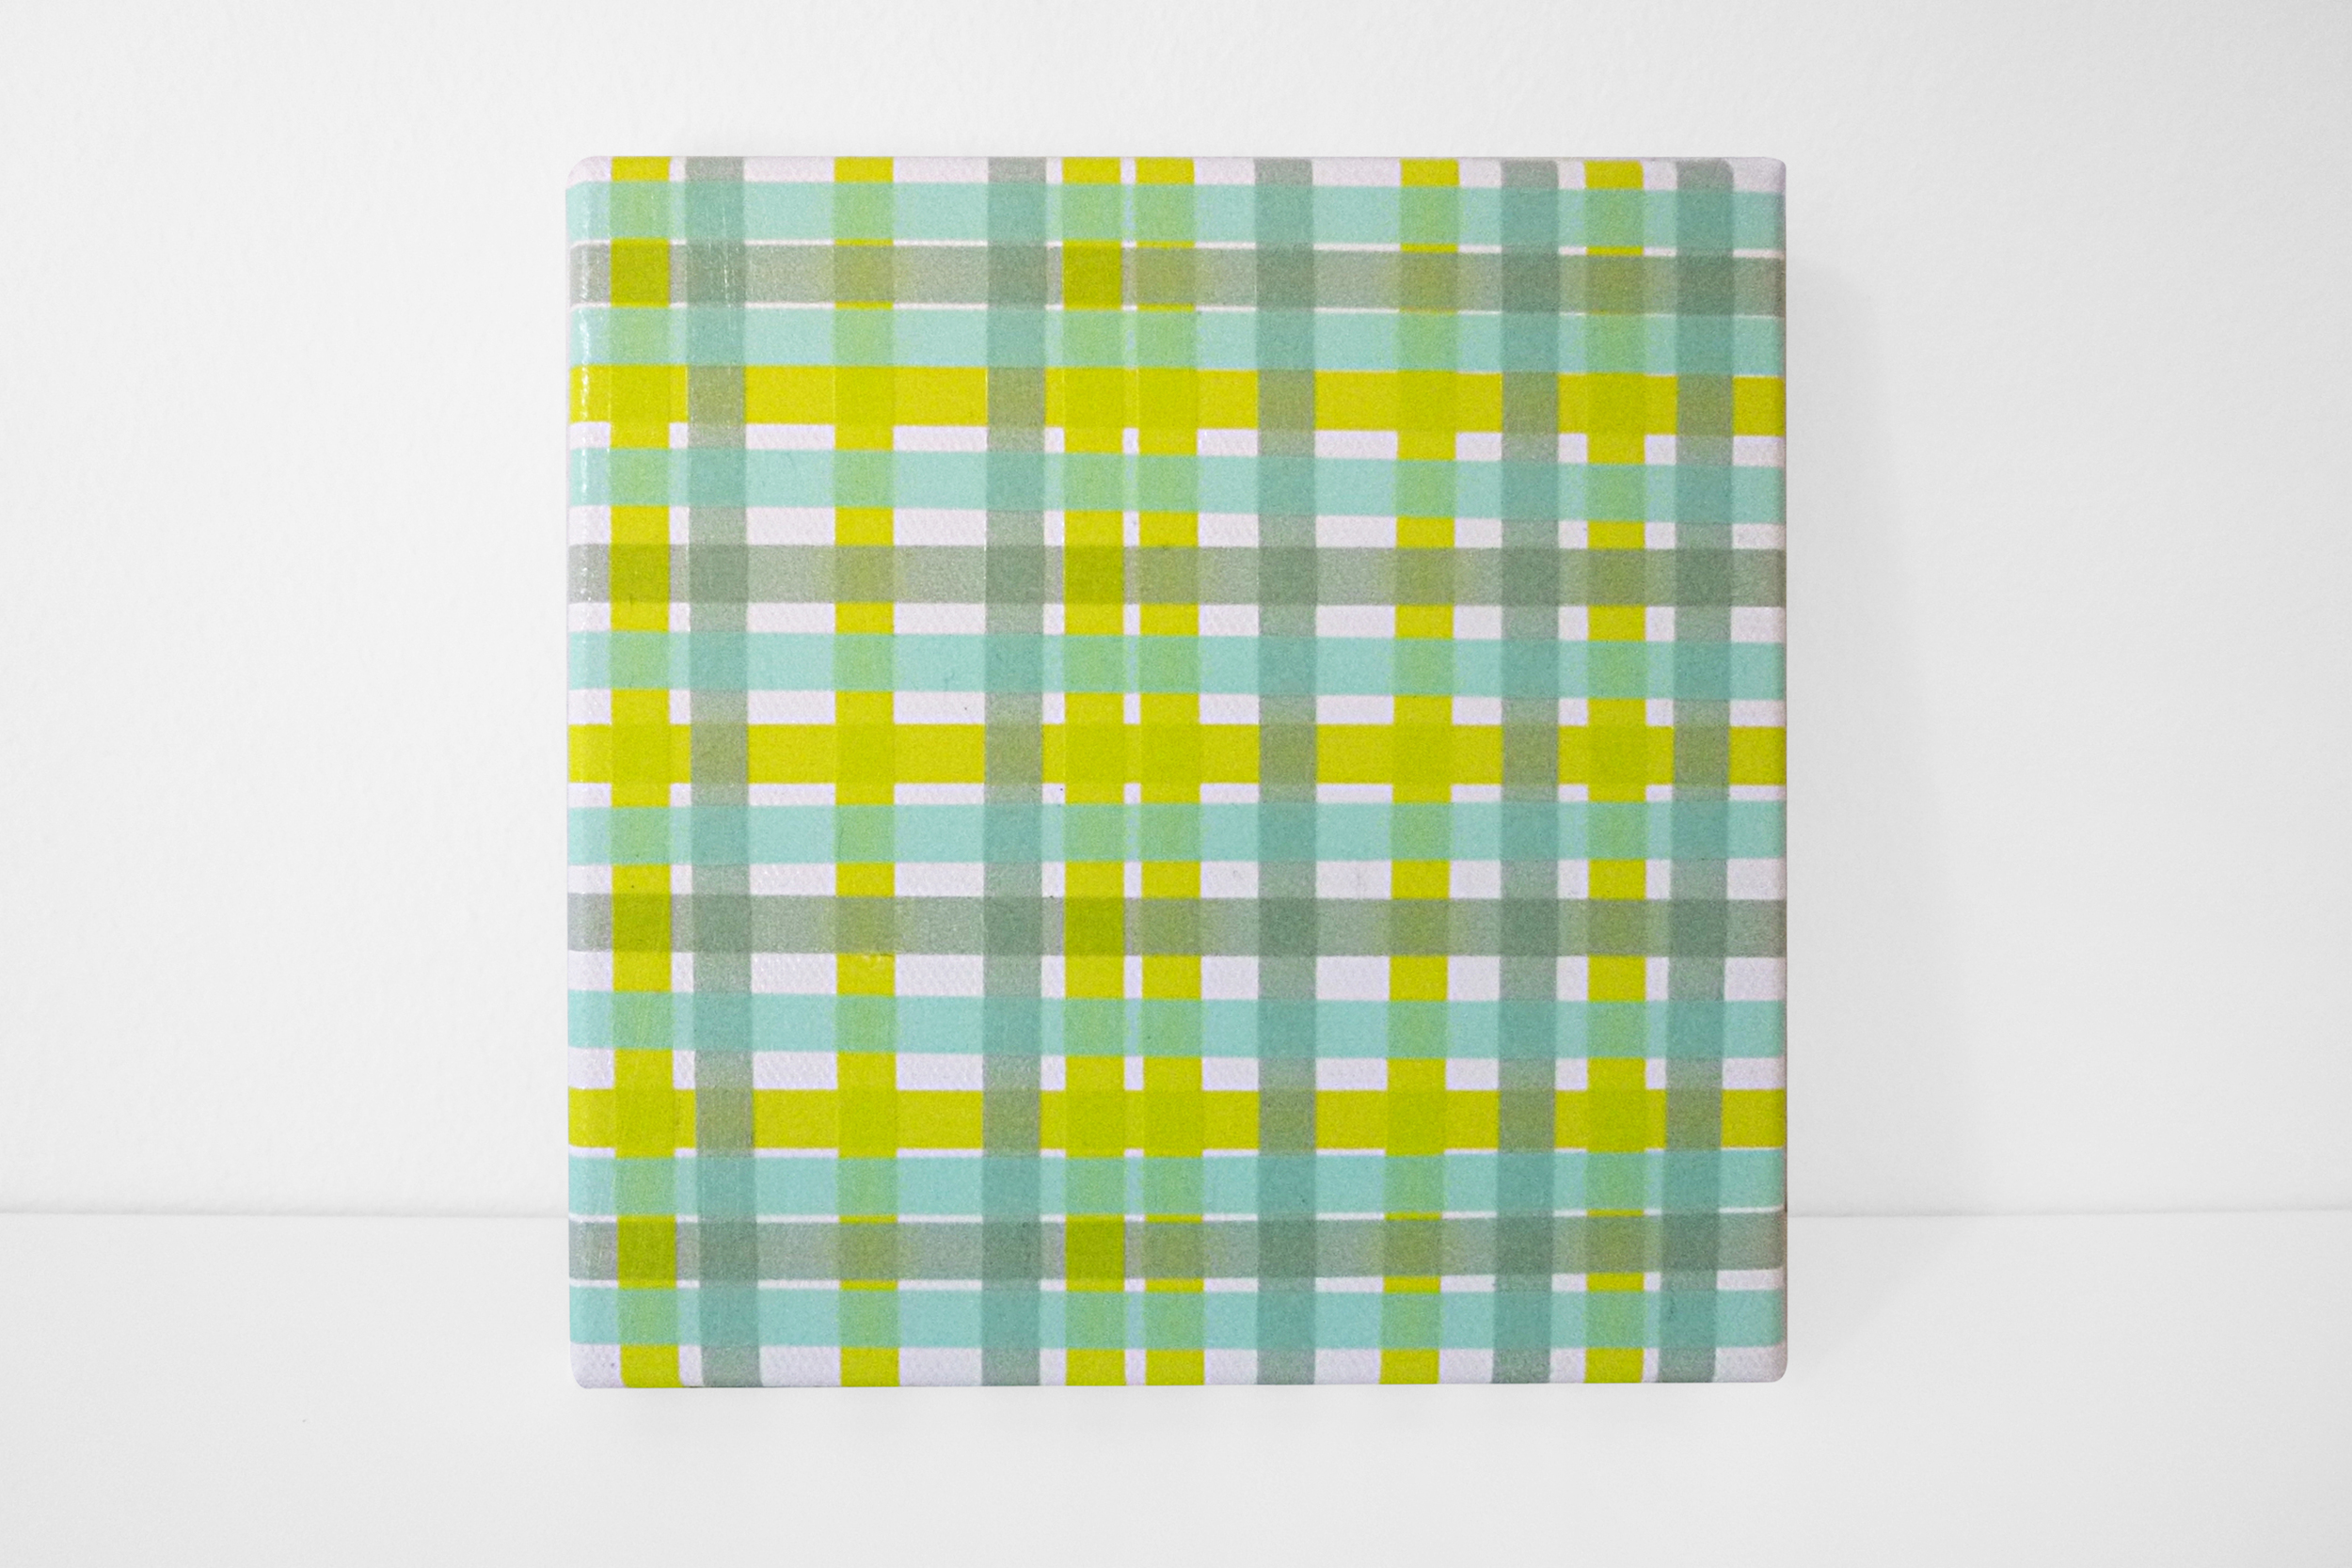  The Green Grid, 2012 mixed media on canvas 15x15 cm / 5.75x5.75 in    